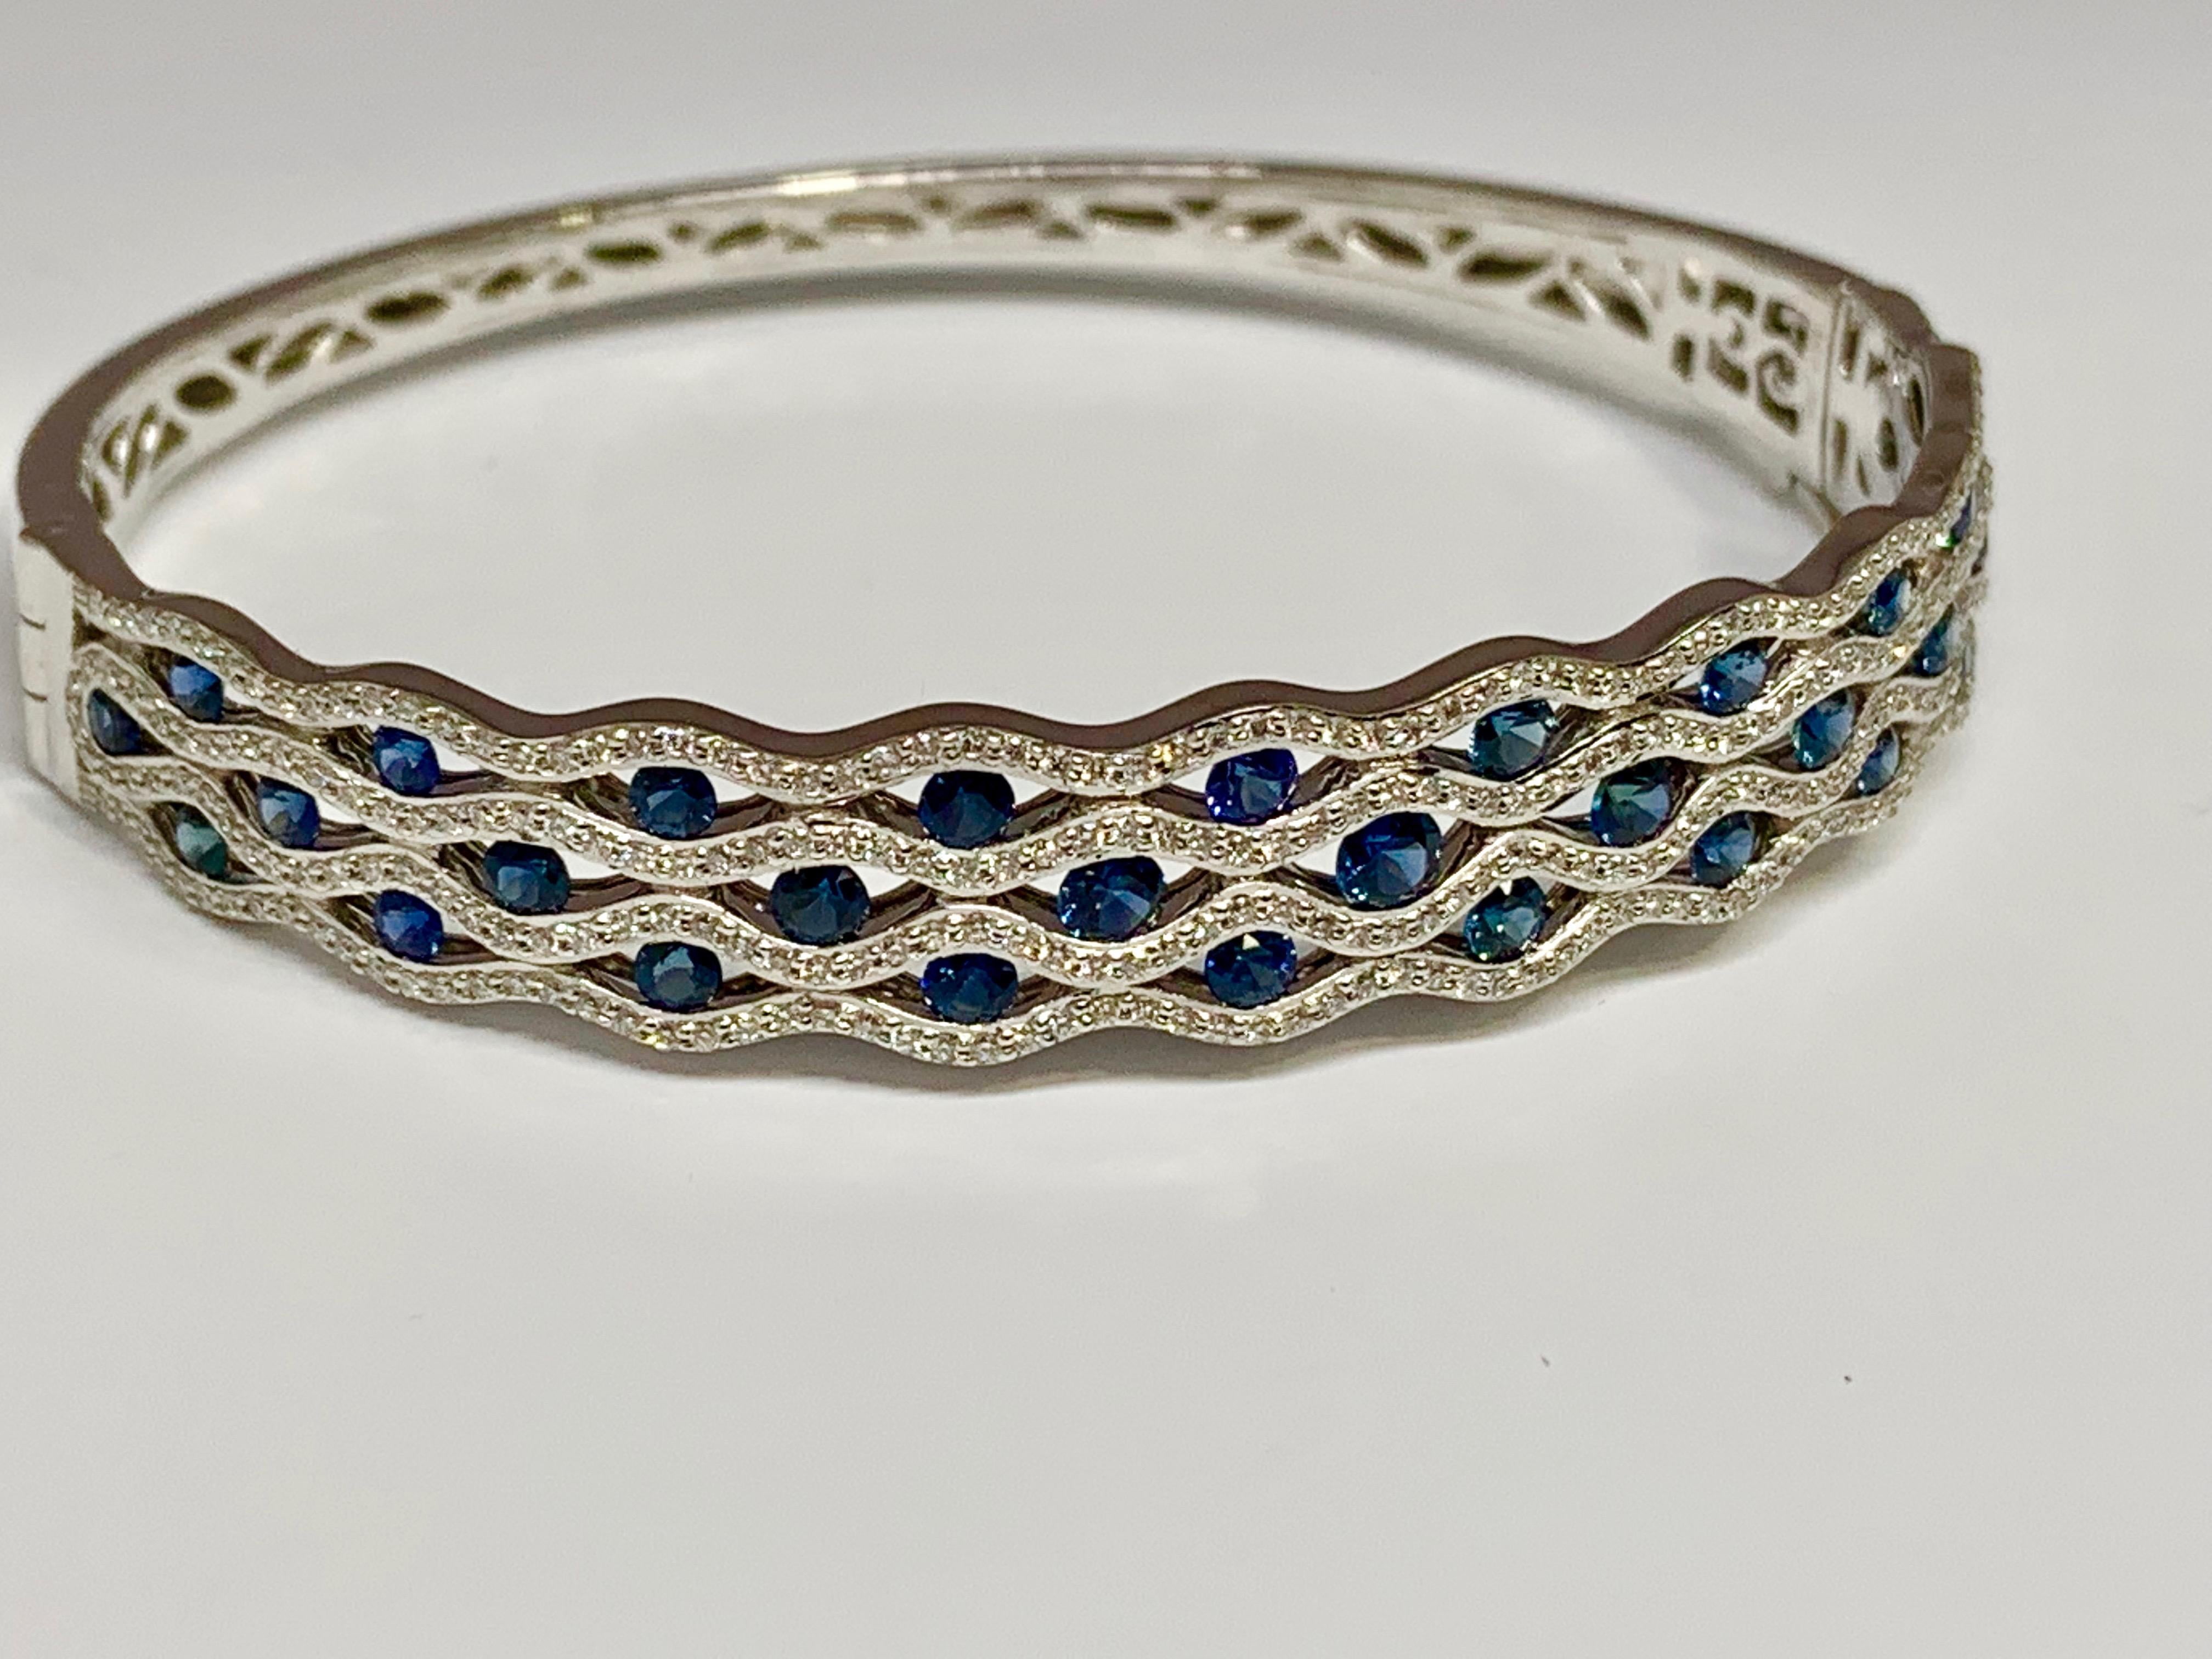 This stunning Allison-Kaufman Company 14K white gold bracelet features a romantic scalloped design and 2.34 total carats of round diamonds and beautiful round blue sapphires. The bracelet includes a box clasp and a figure 8 safety clasp for extra